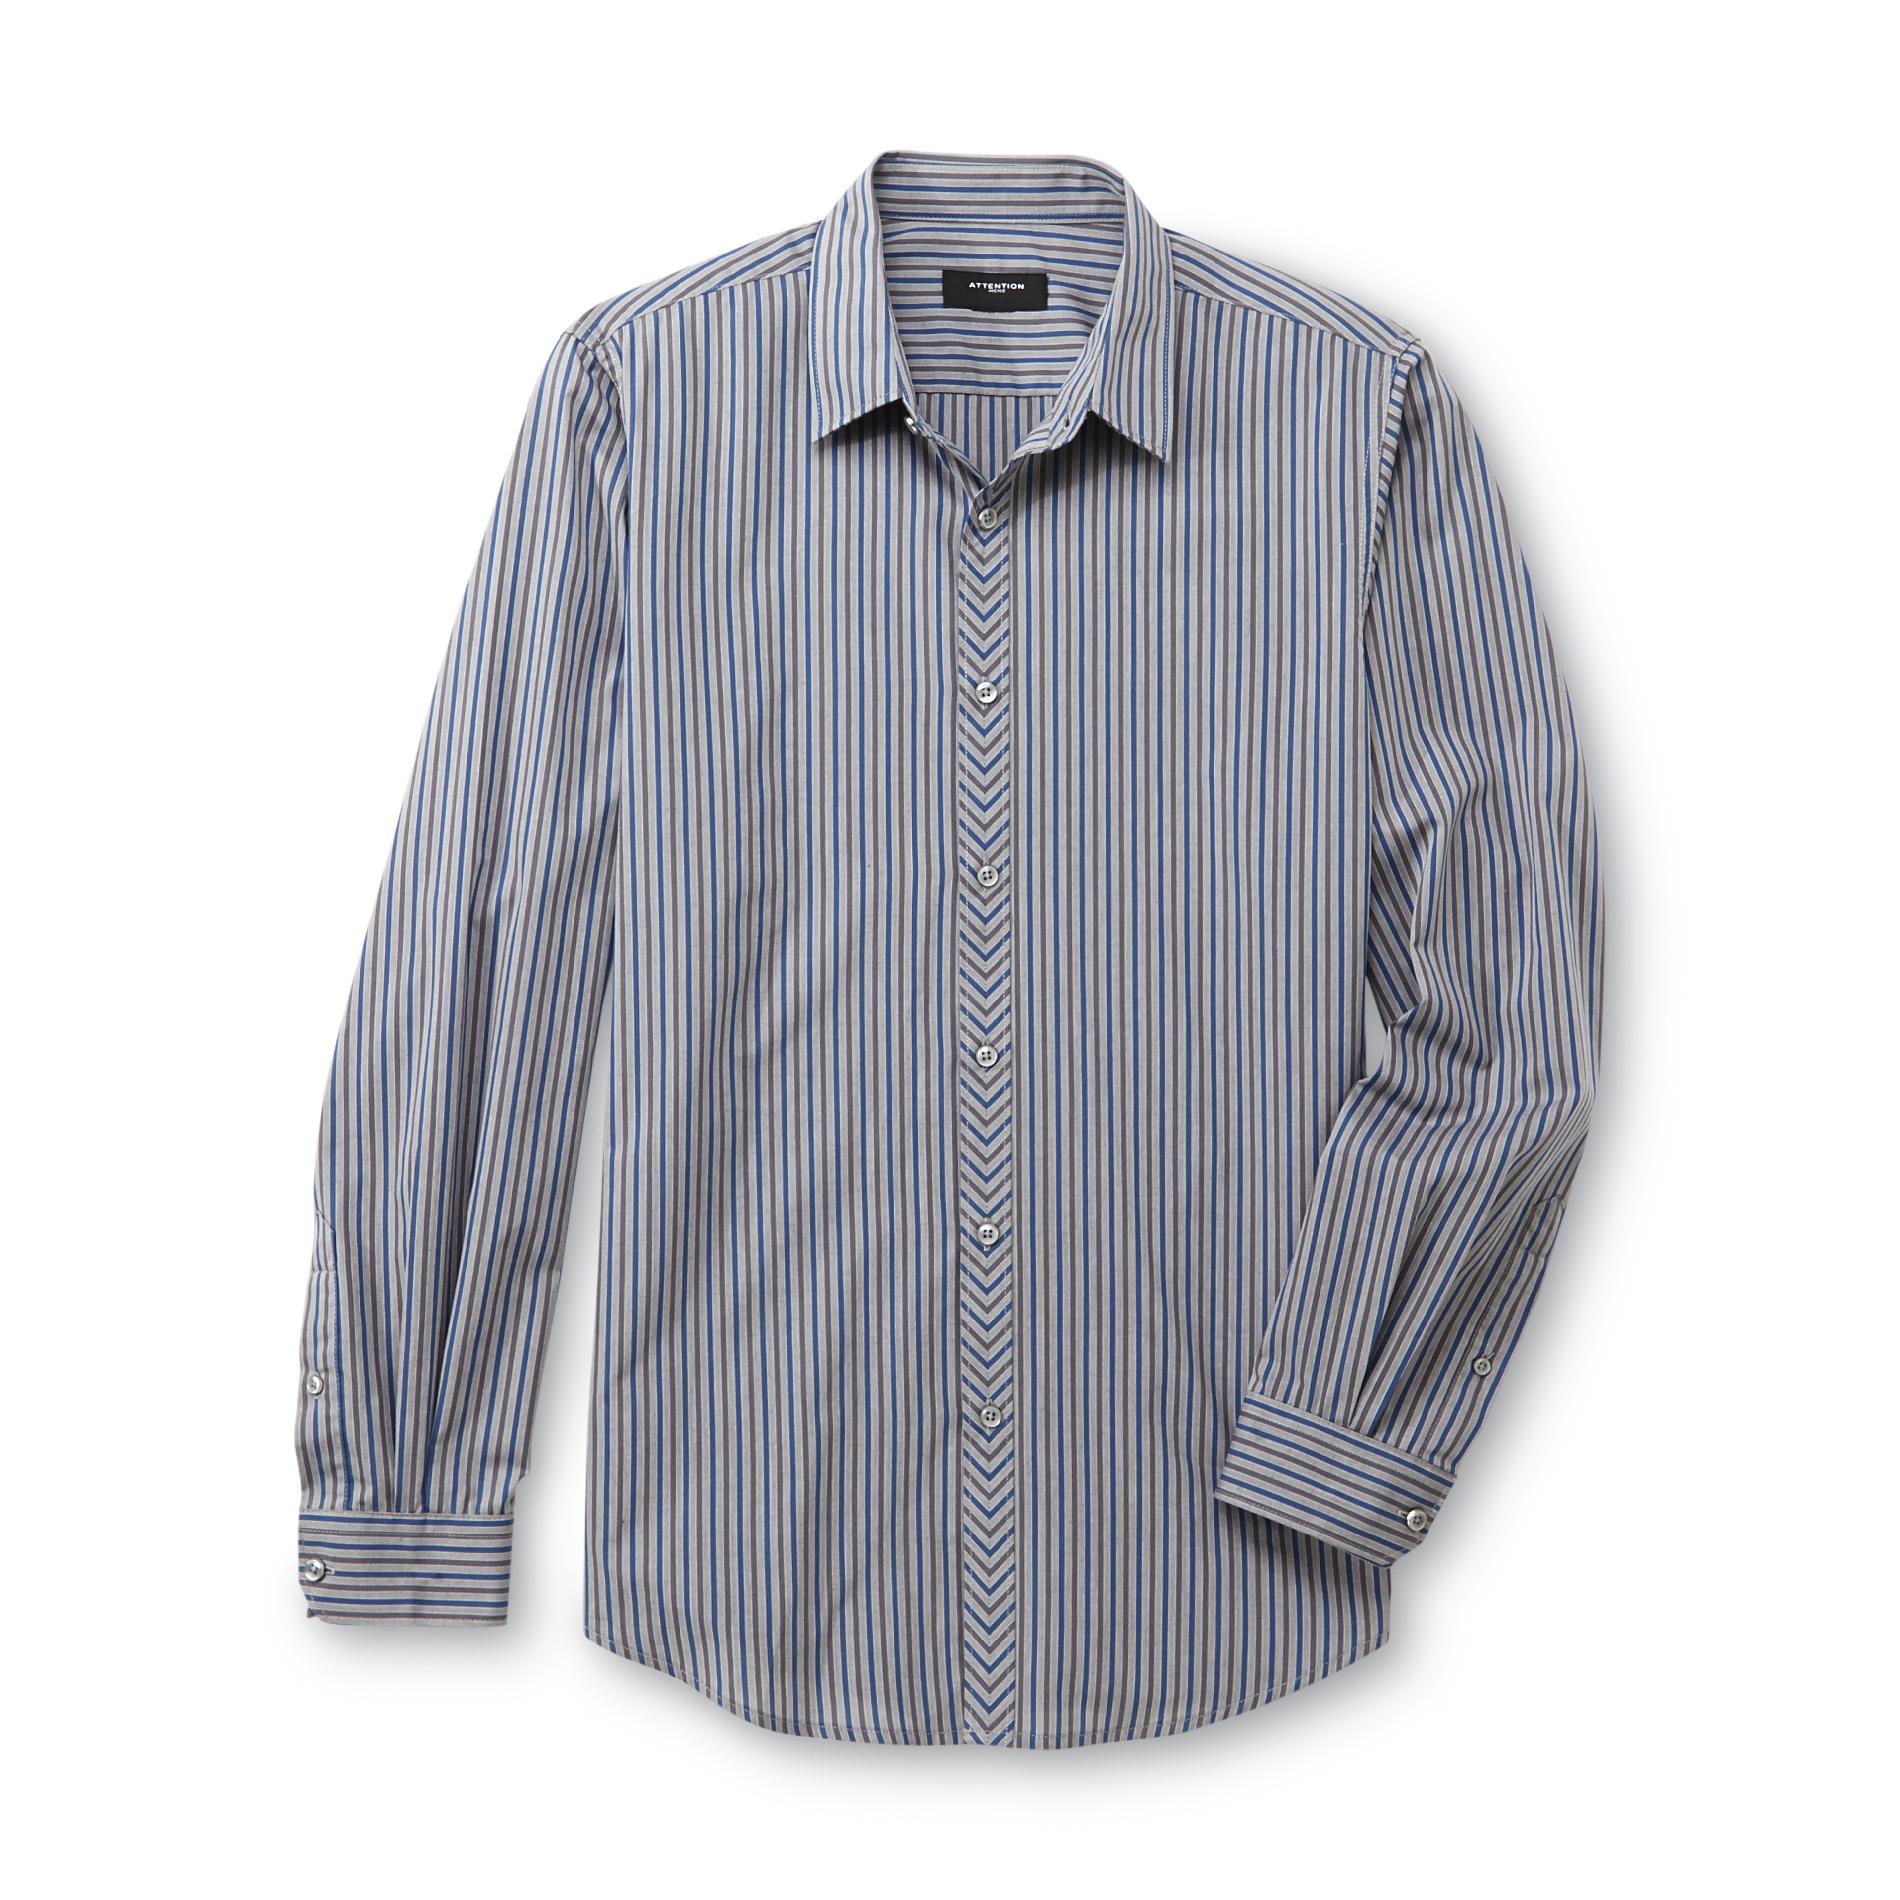 Attention Men's Modern Fit Collared Casual Shirt - Striped